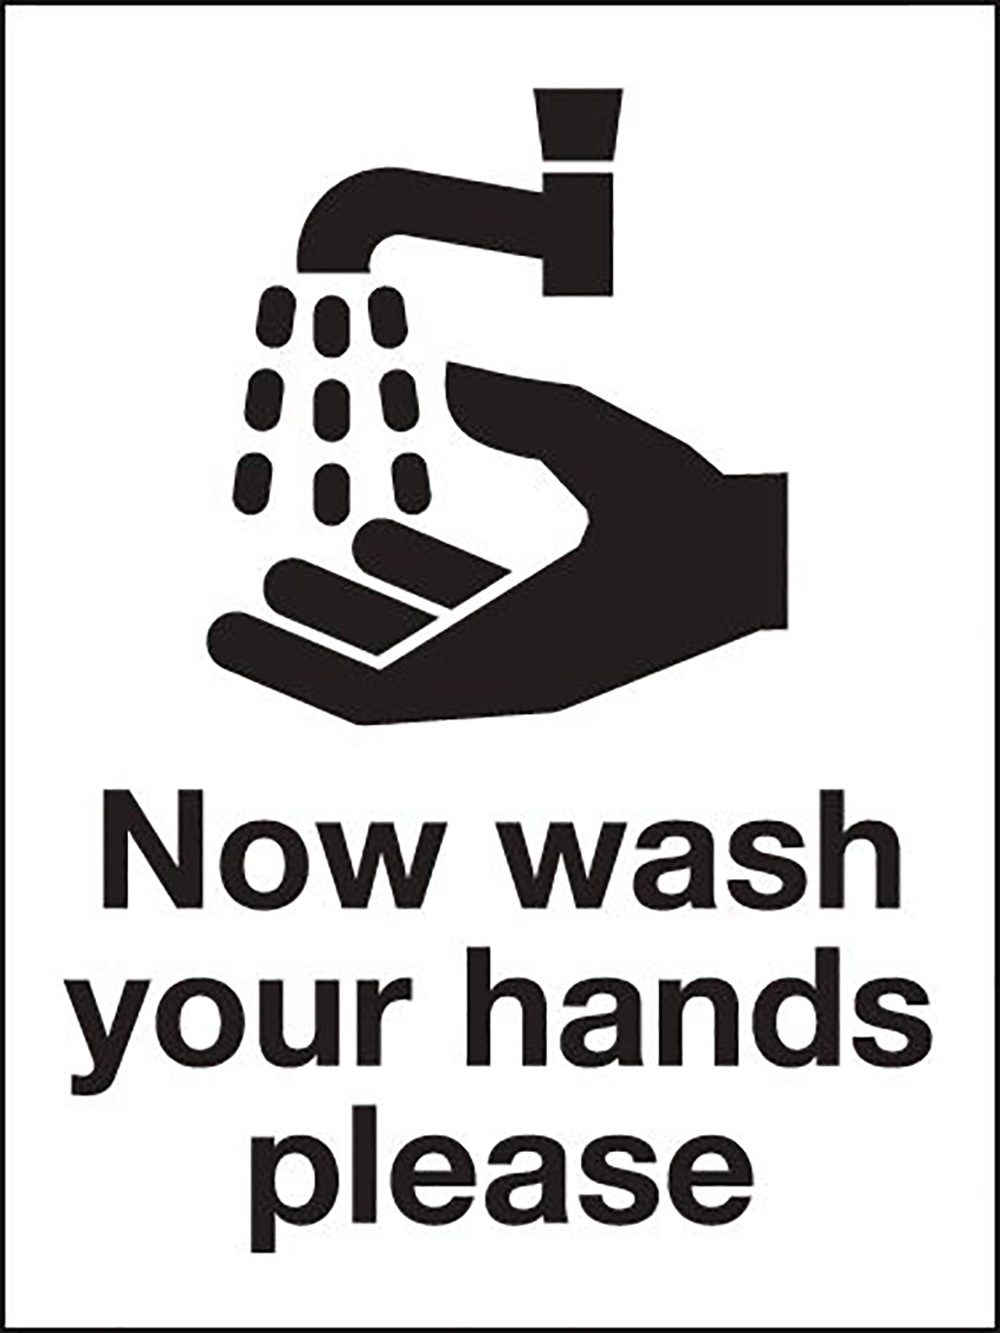 200x150mm Now wash your hands please